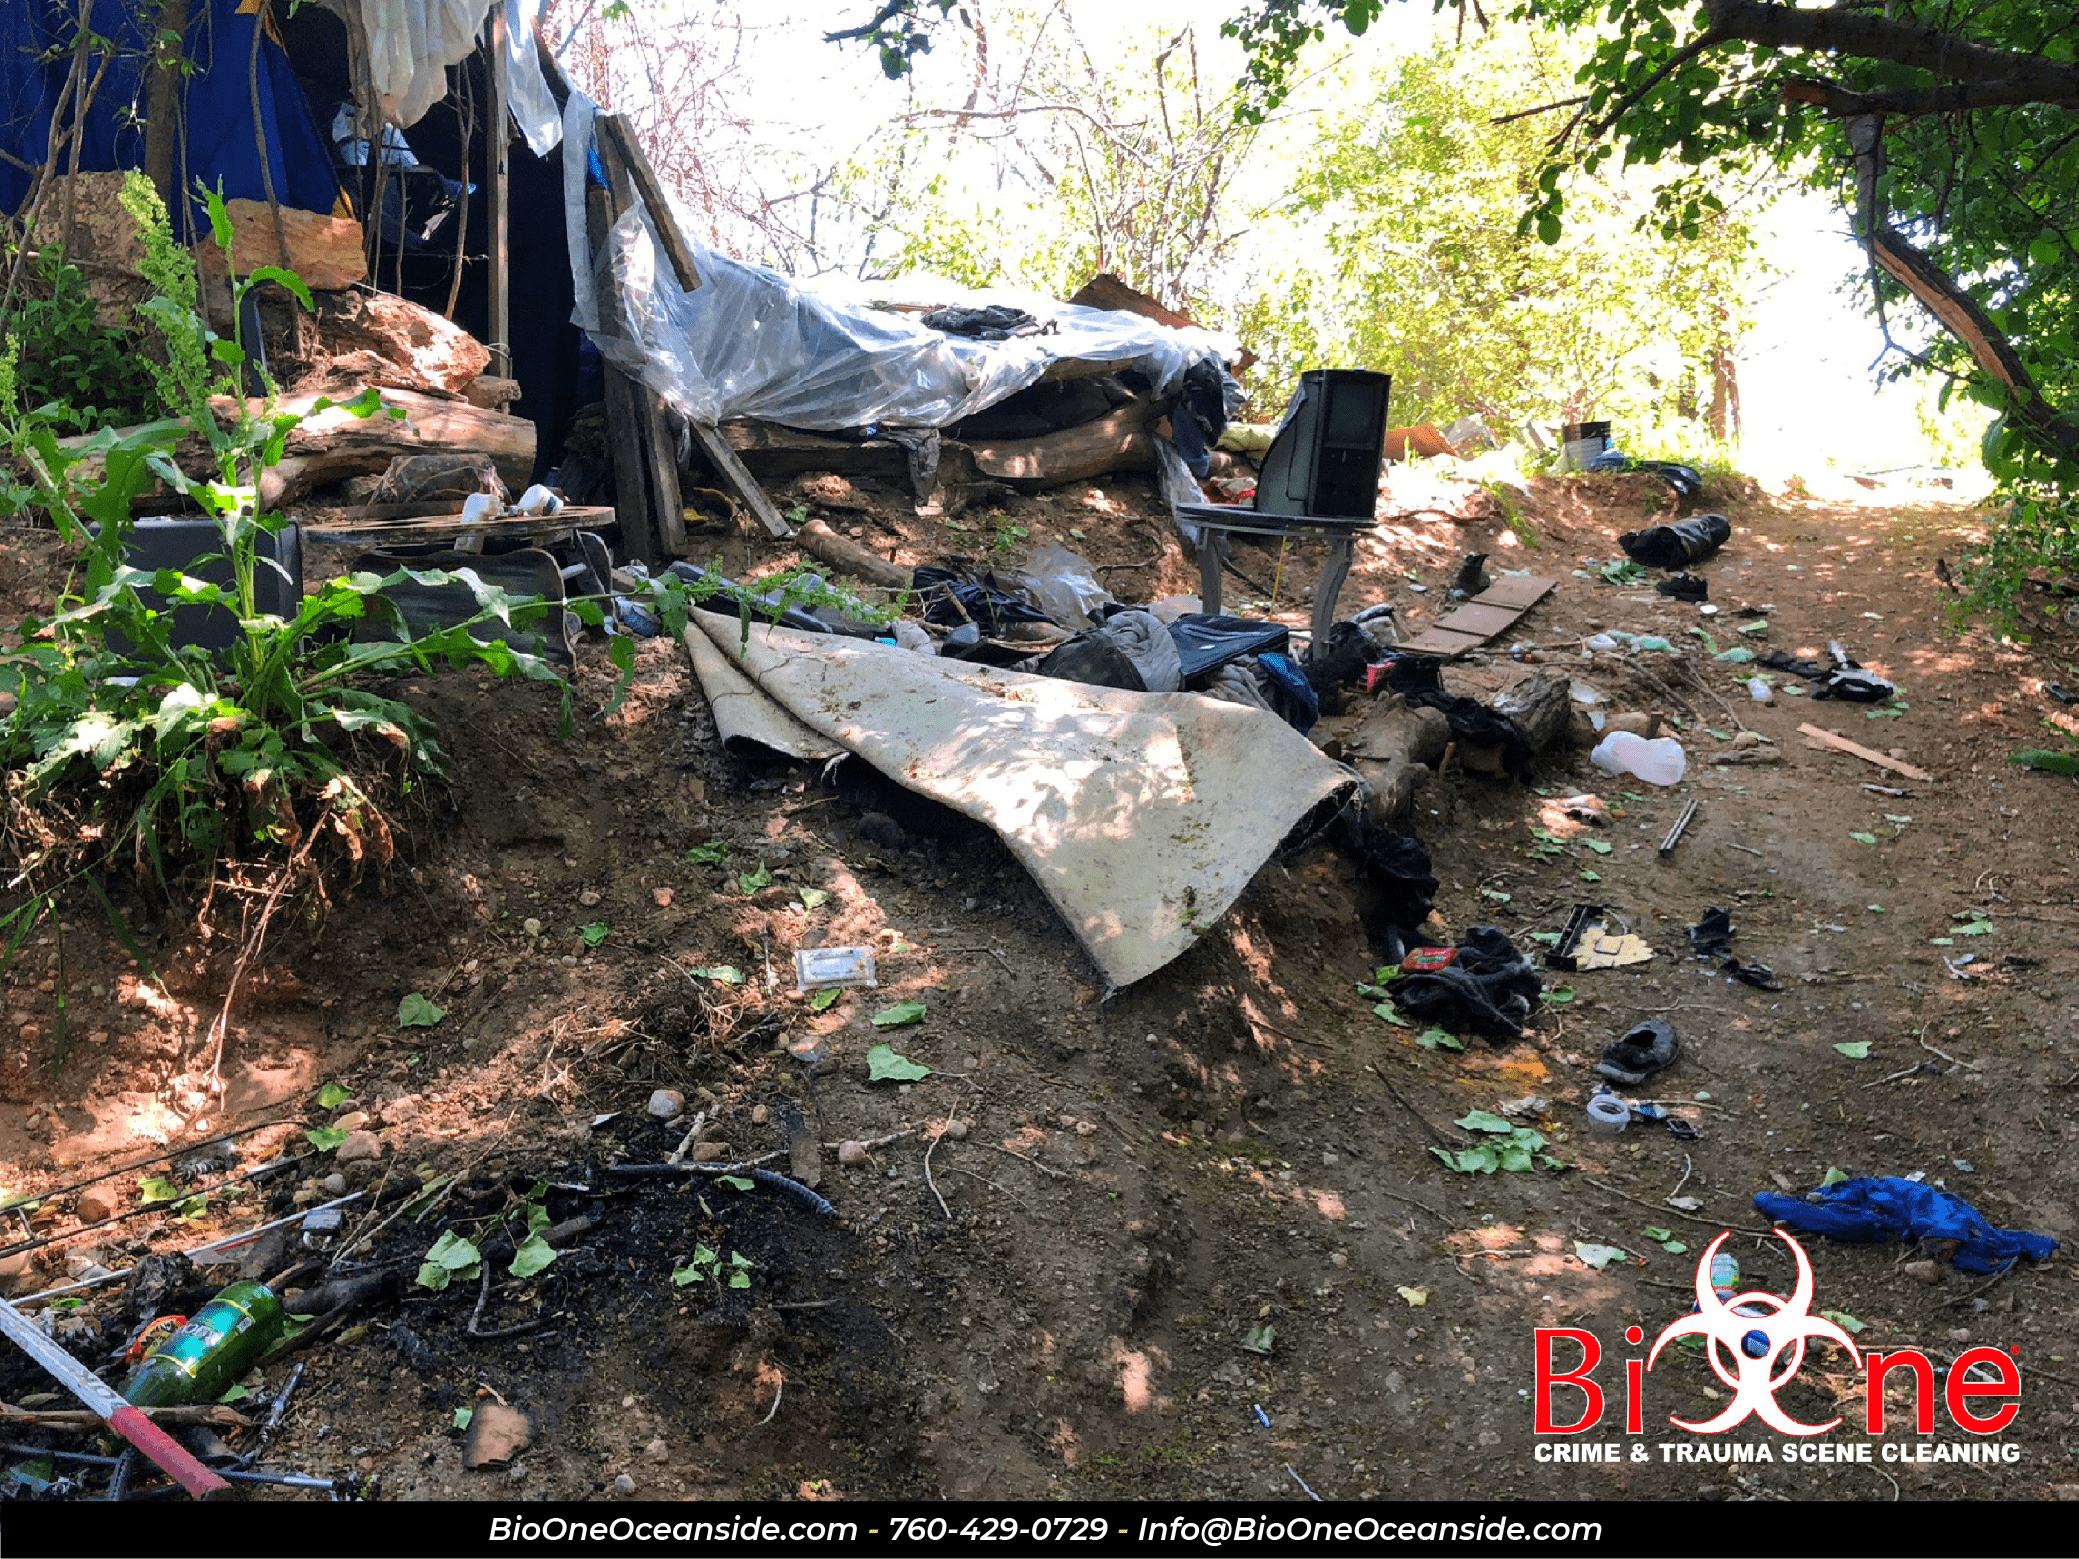 Image shows trash and debris found in a homeless encampment.